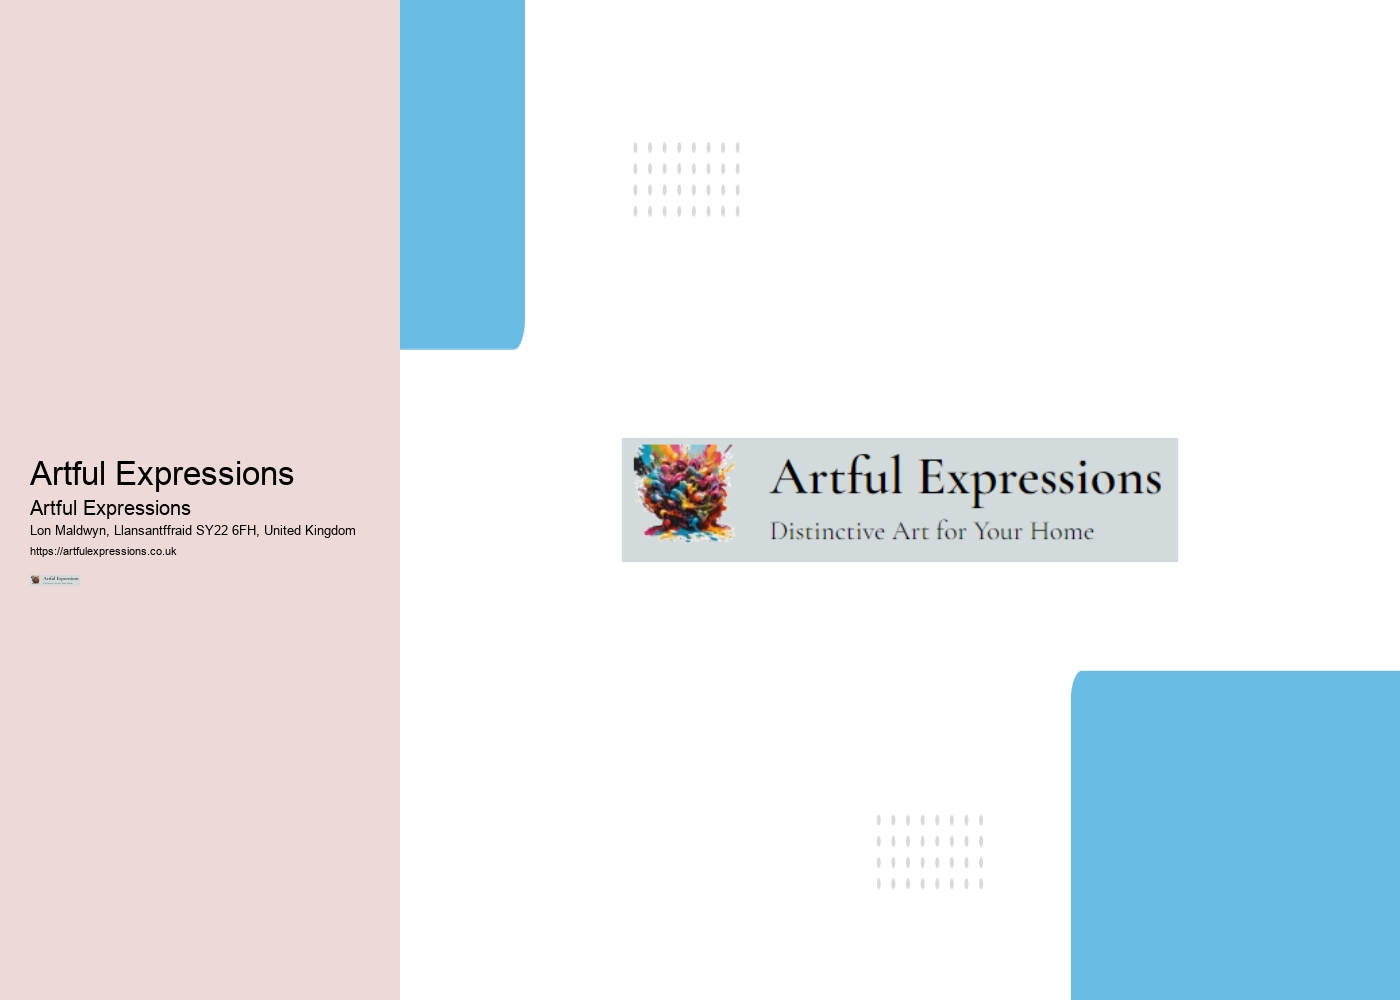 Artful Expressions